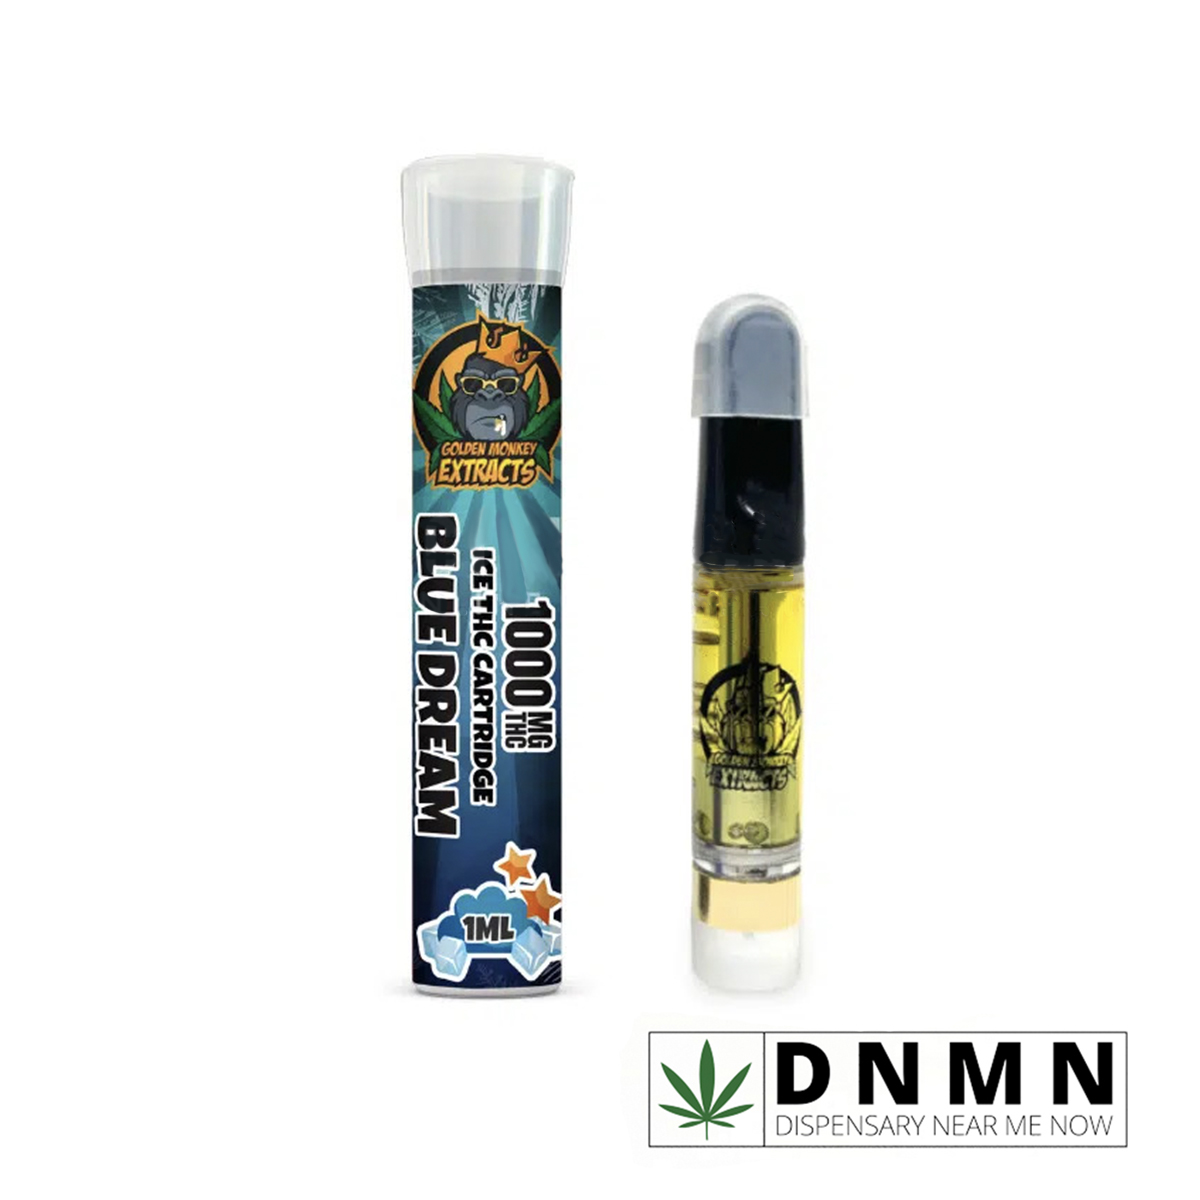 Golden Monkey Extracts - ICED Blue Dream Cartridge | Buy Vapes Online | Dispensary Near Me